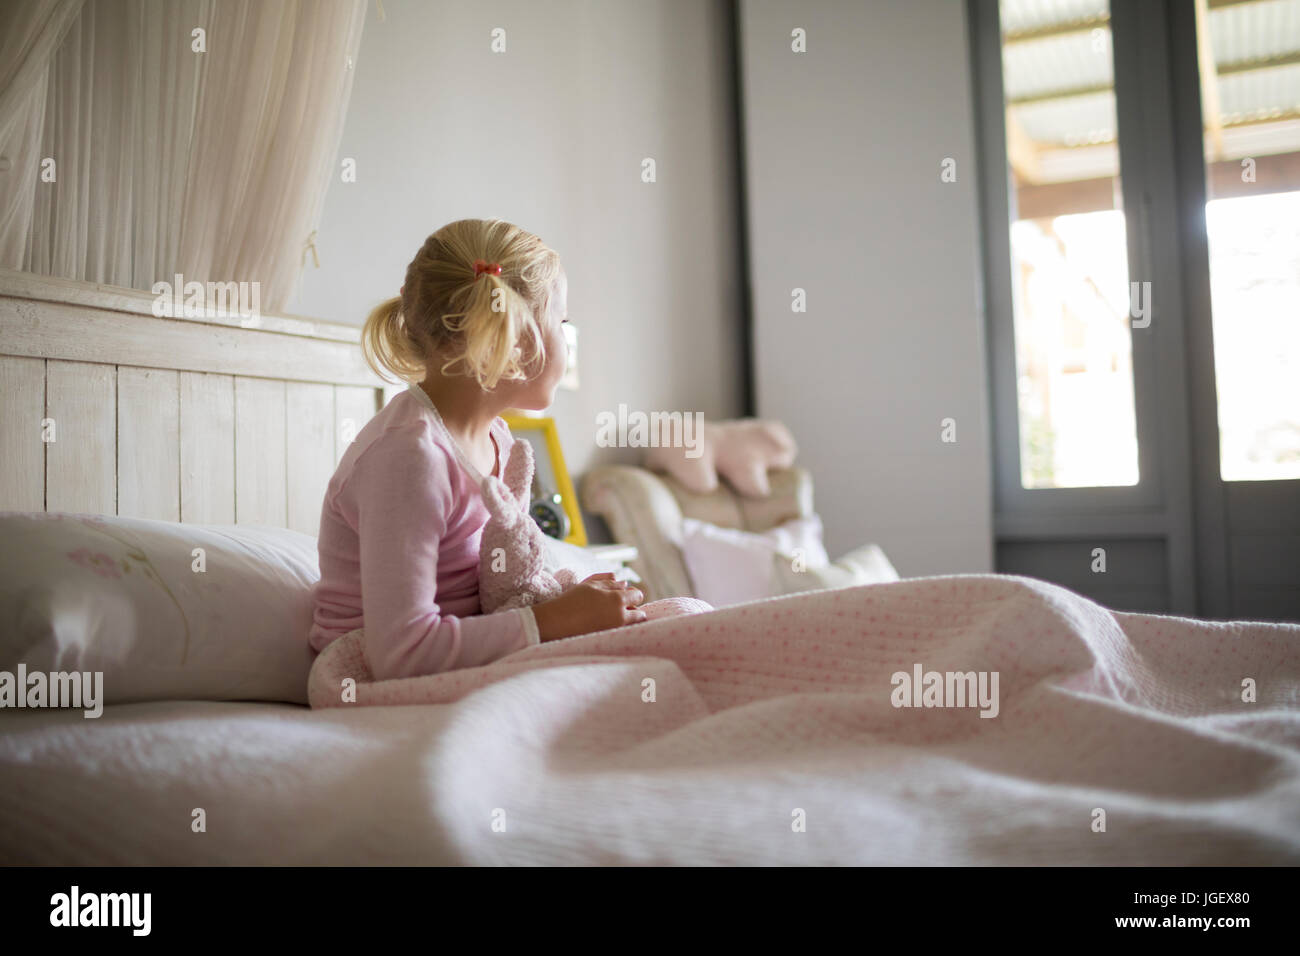 Thoughtful girl relaxing on bed in the bedroom at home Stock Photo